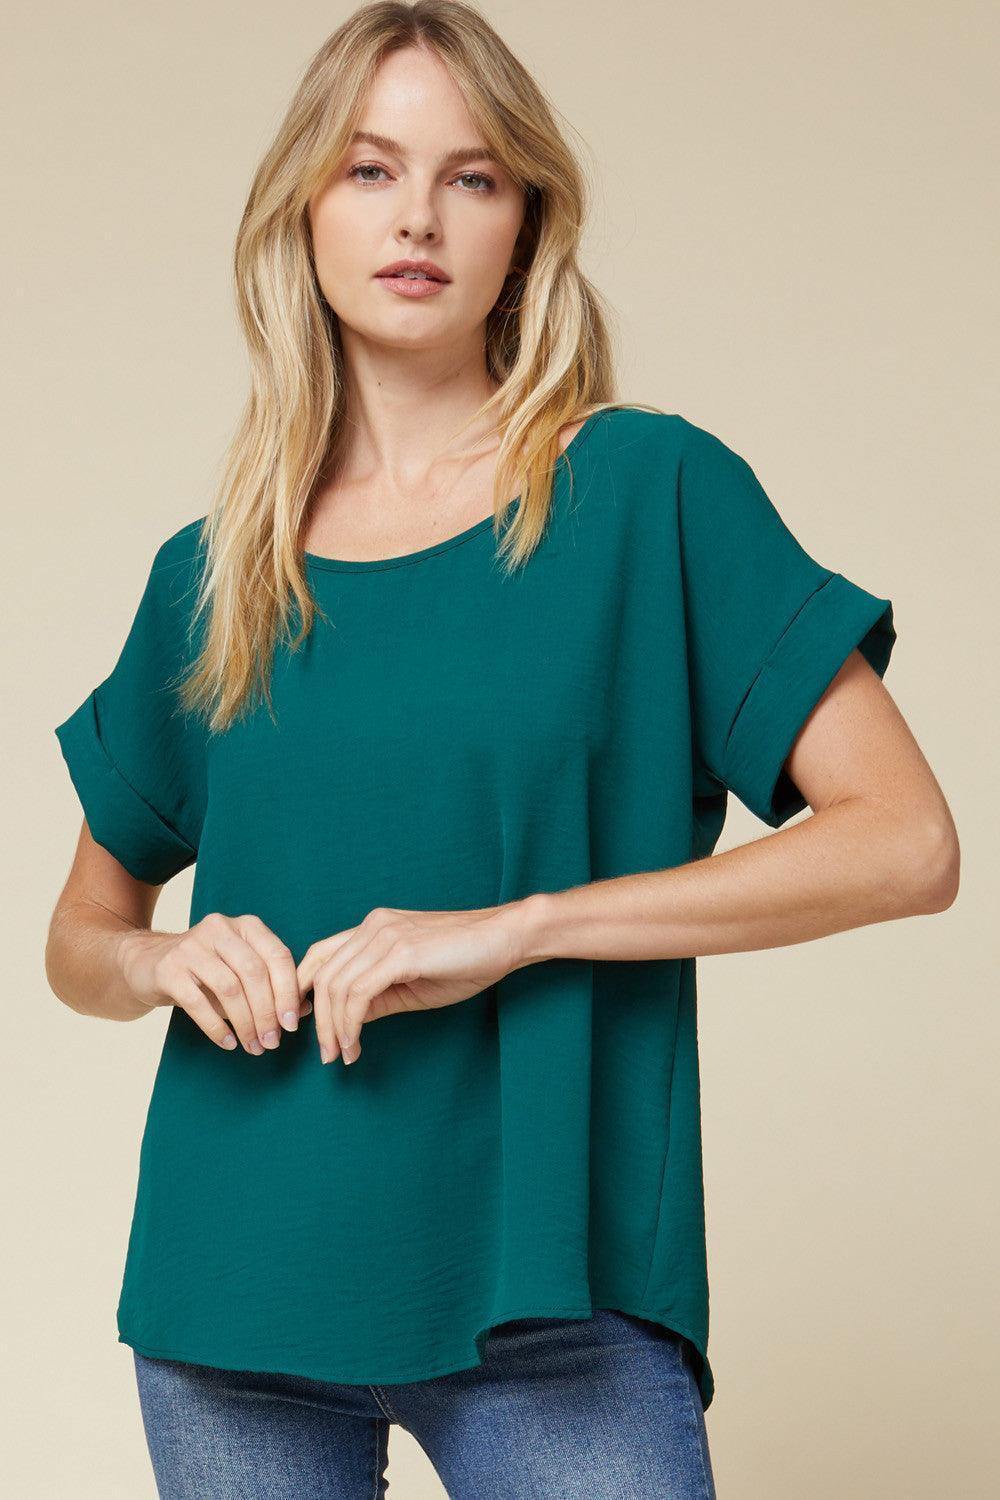 Classic Cuff Sleeved Top - Très Chic